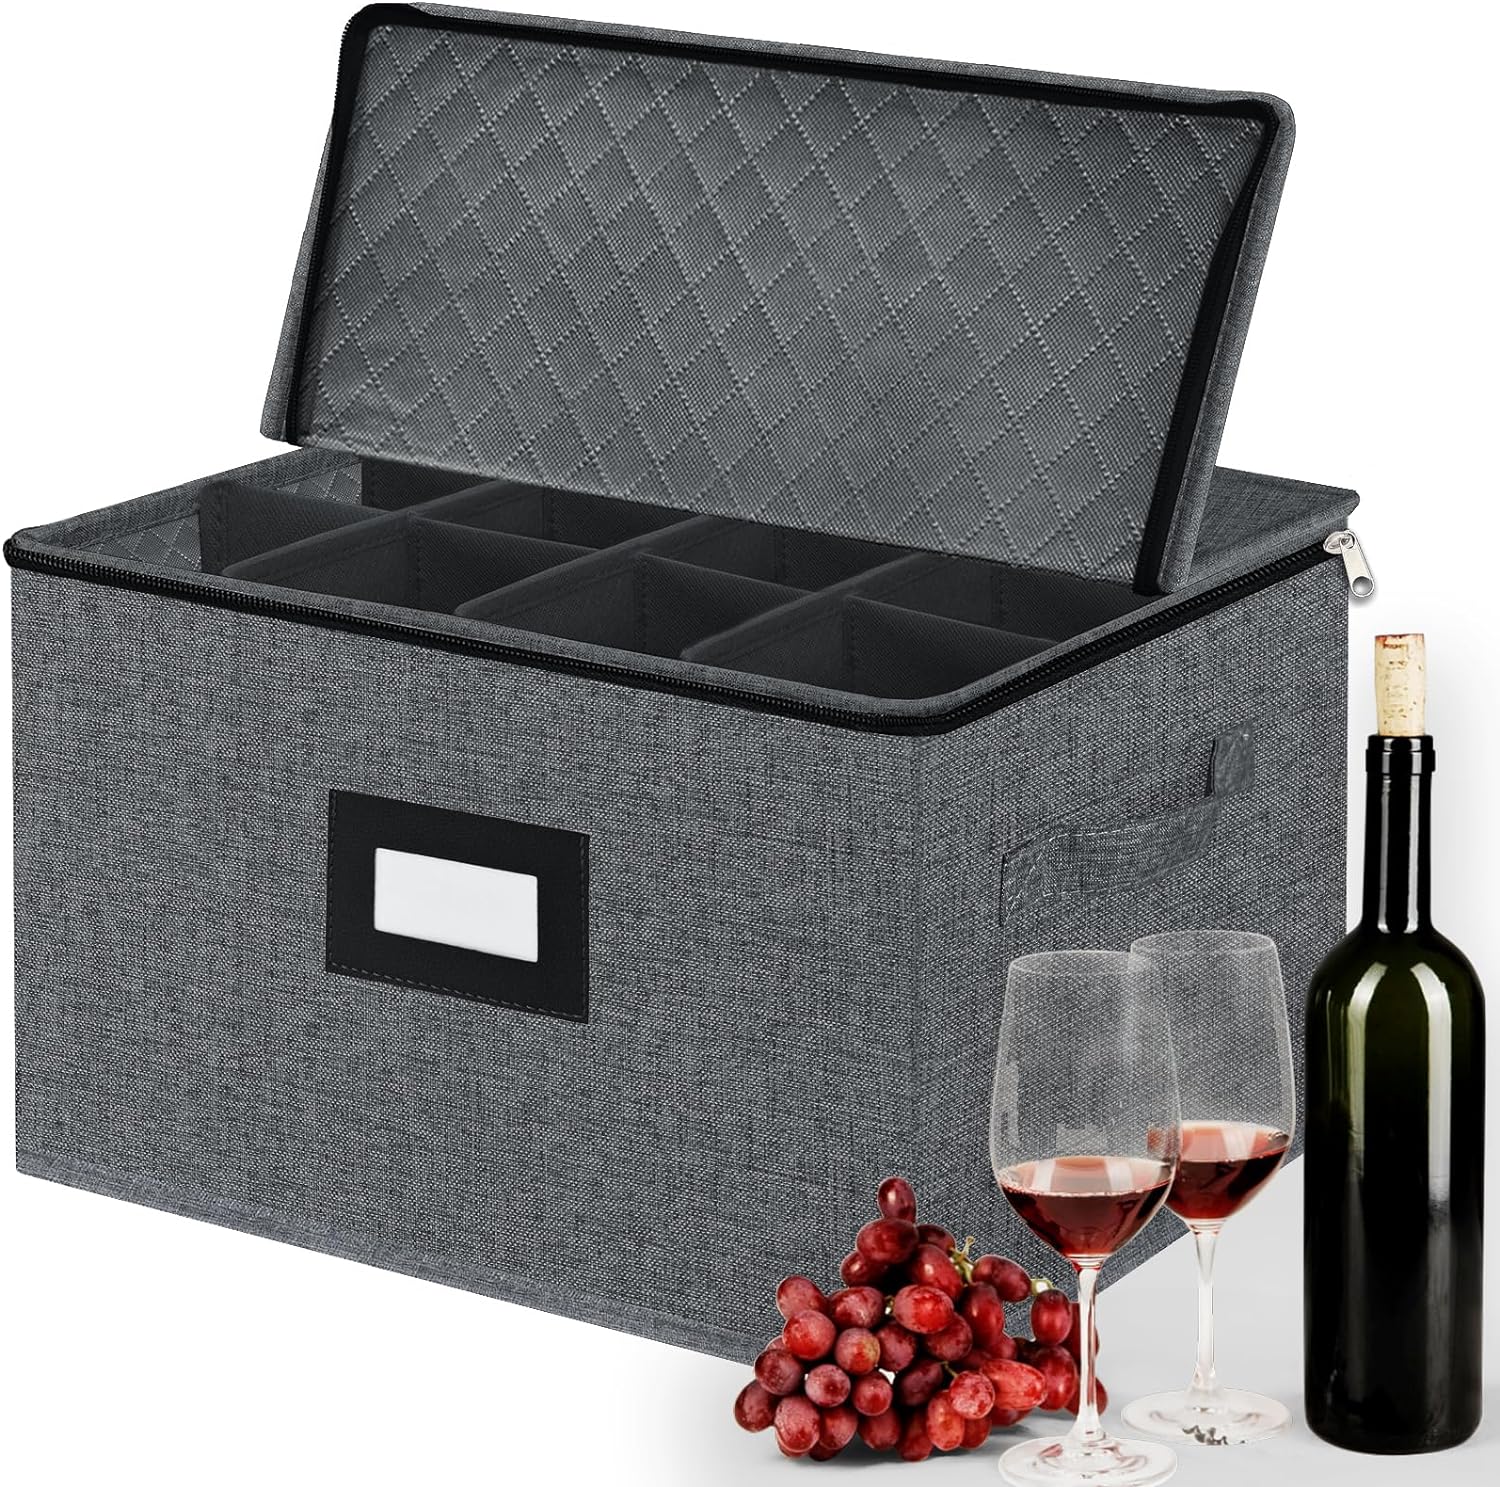 Wine glasses are delicate and can easily break if not stored properly. Our wine glass storage boxes are the perfect solution for keeping your glasses safe and protected.